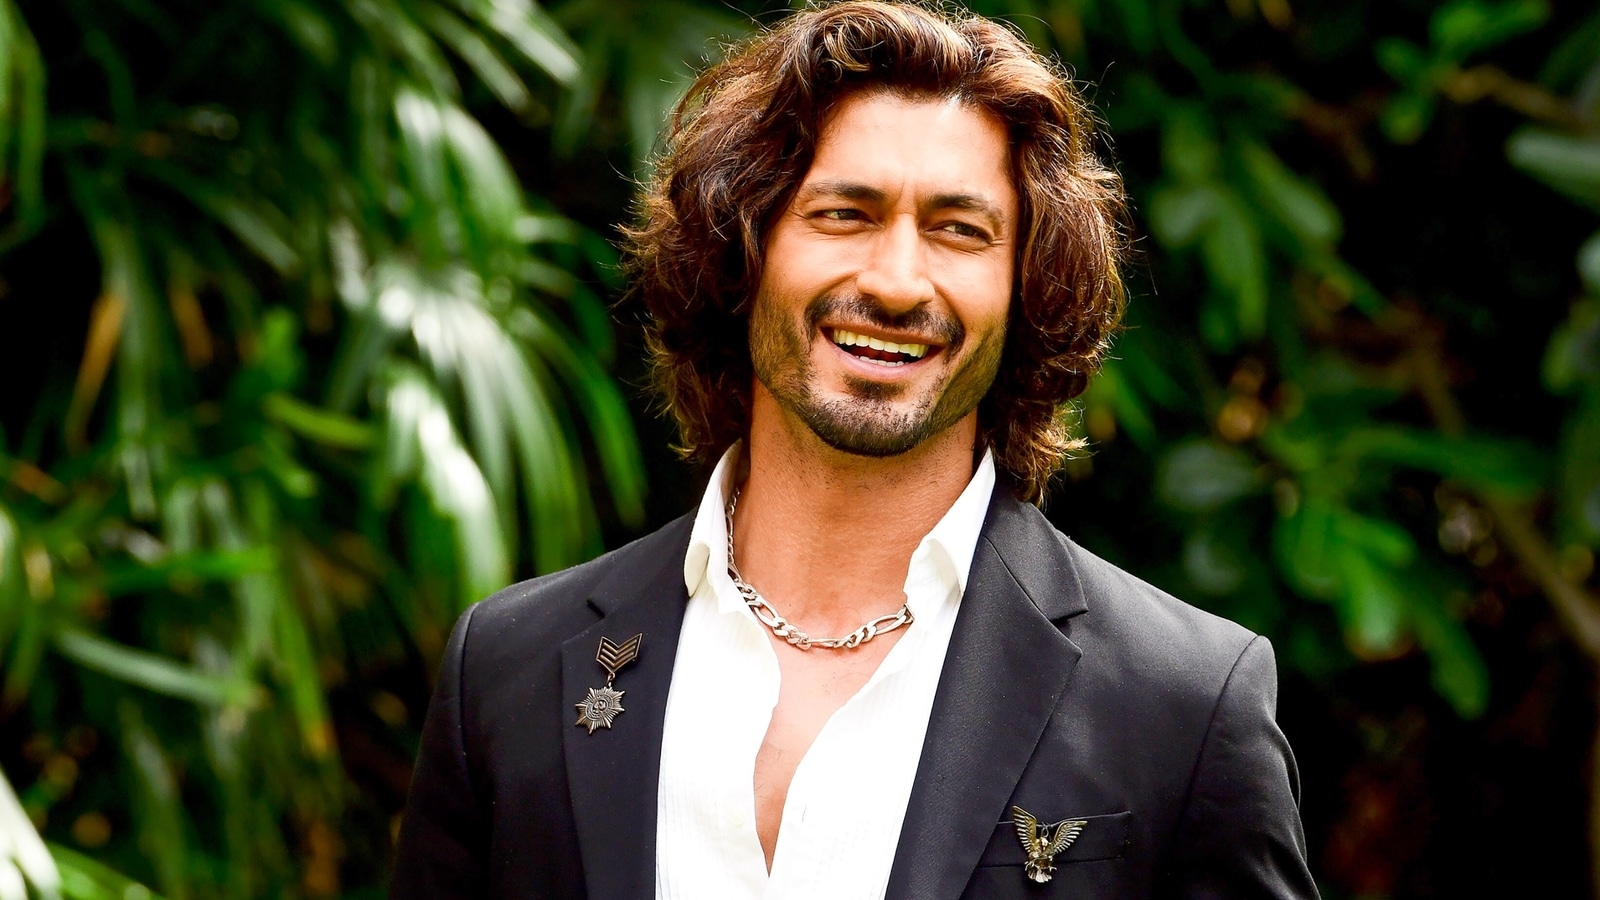 Vidyut Jammwal: ‘Proud to be typecast, happy to be defined by action’